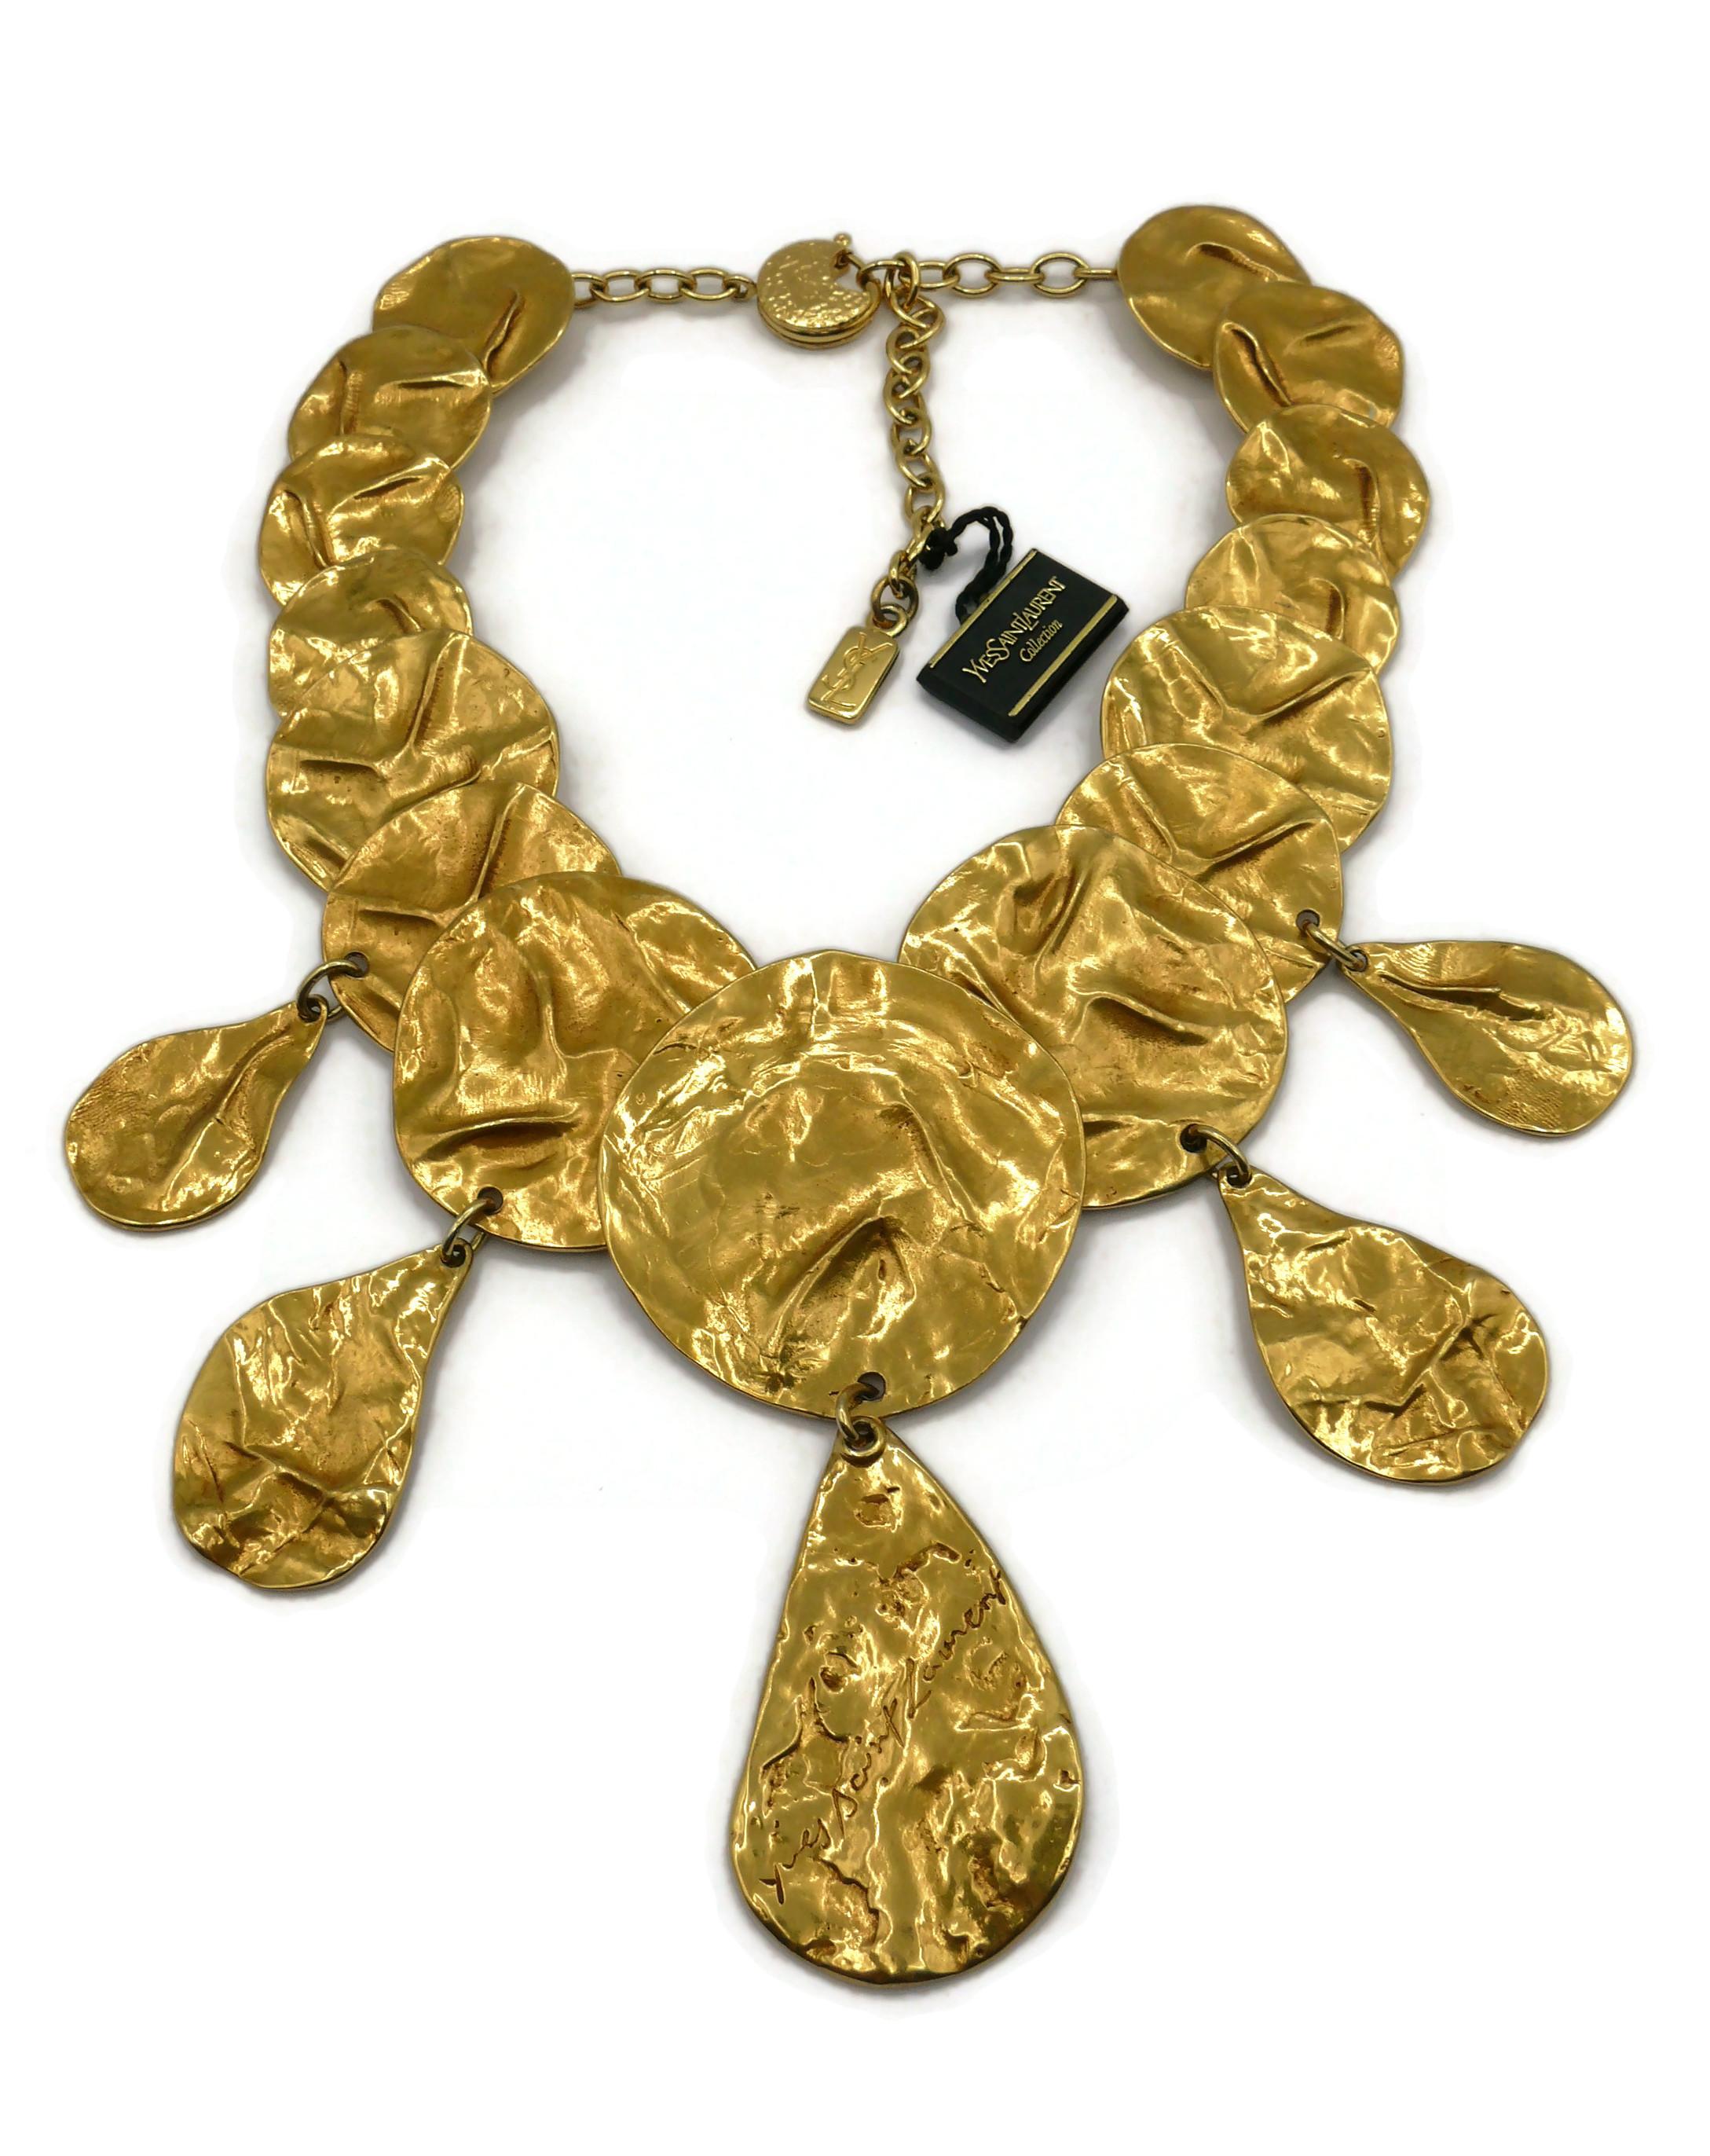 YVES SAINT LAURENT YSL Vintage Opulent Gold Tone Crumpled Discs Necklace In Excellent Condition For Sale In Nice, FR